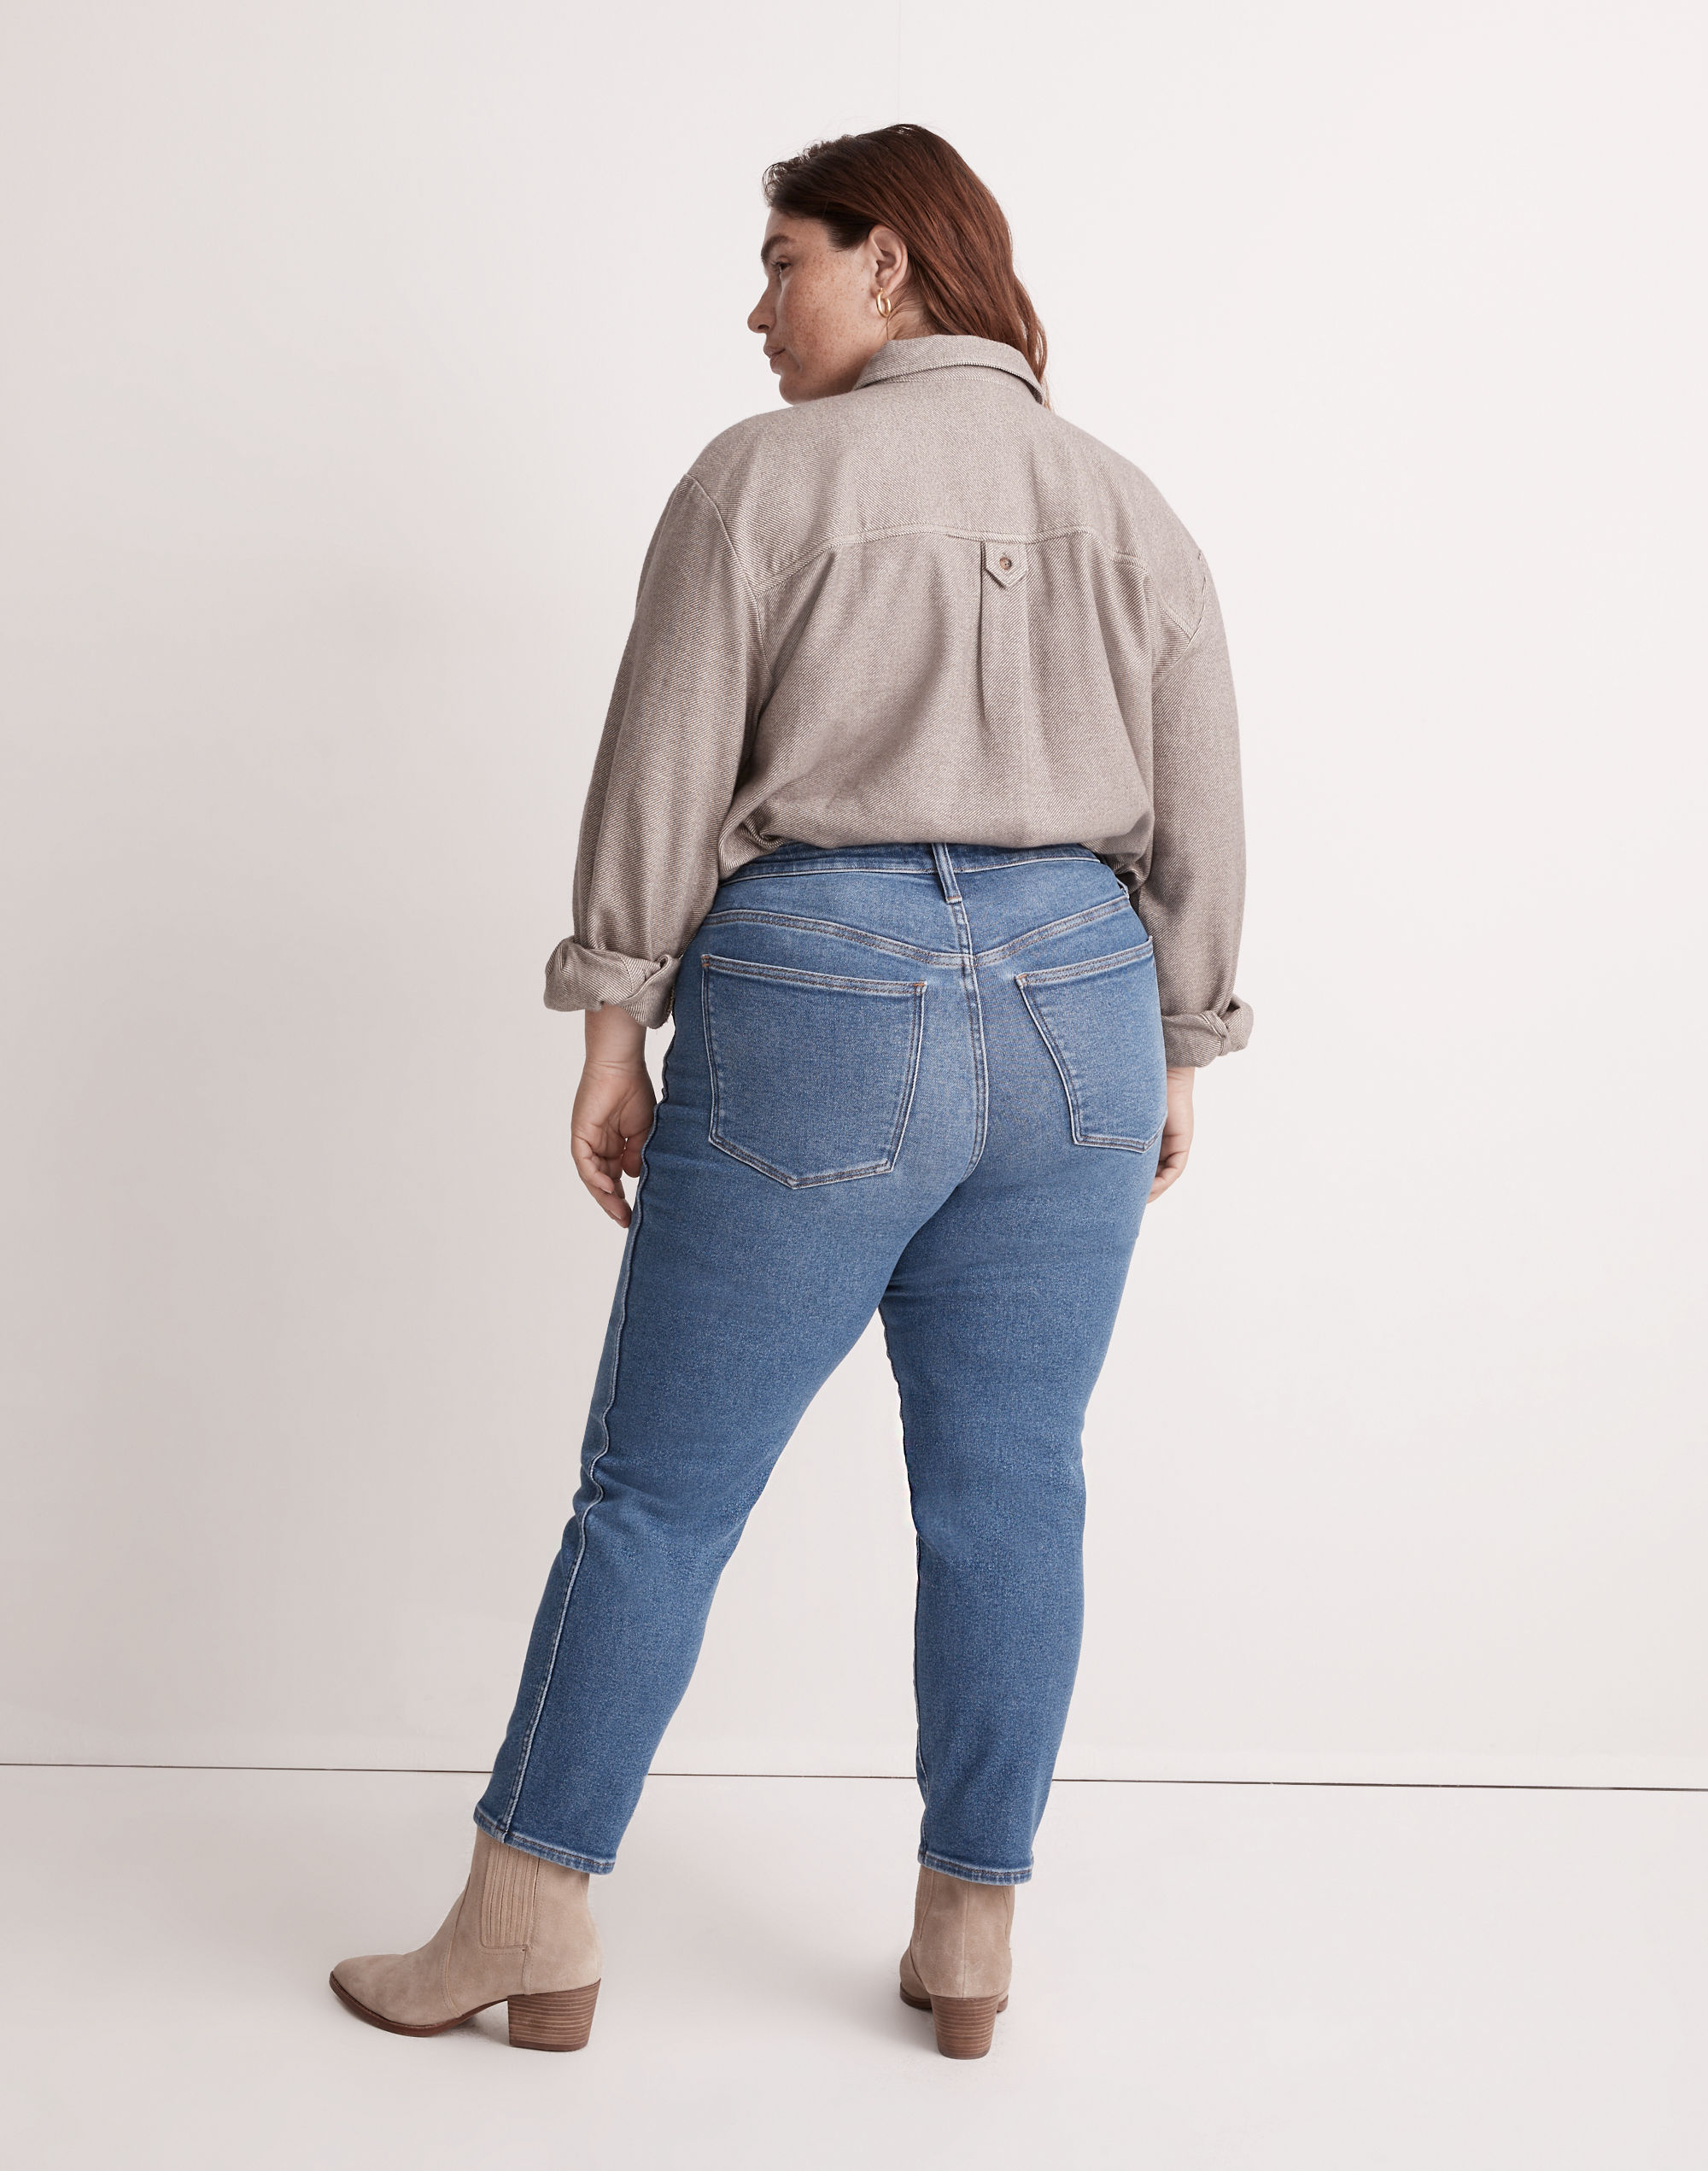 Plus Curvy Stovepipe Jeans in Leaside Wash